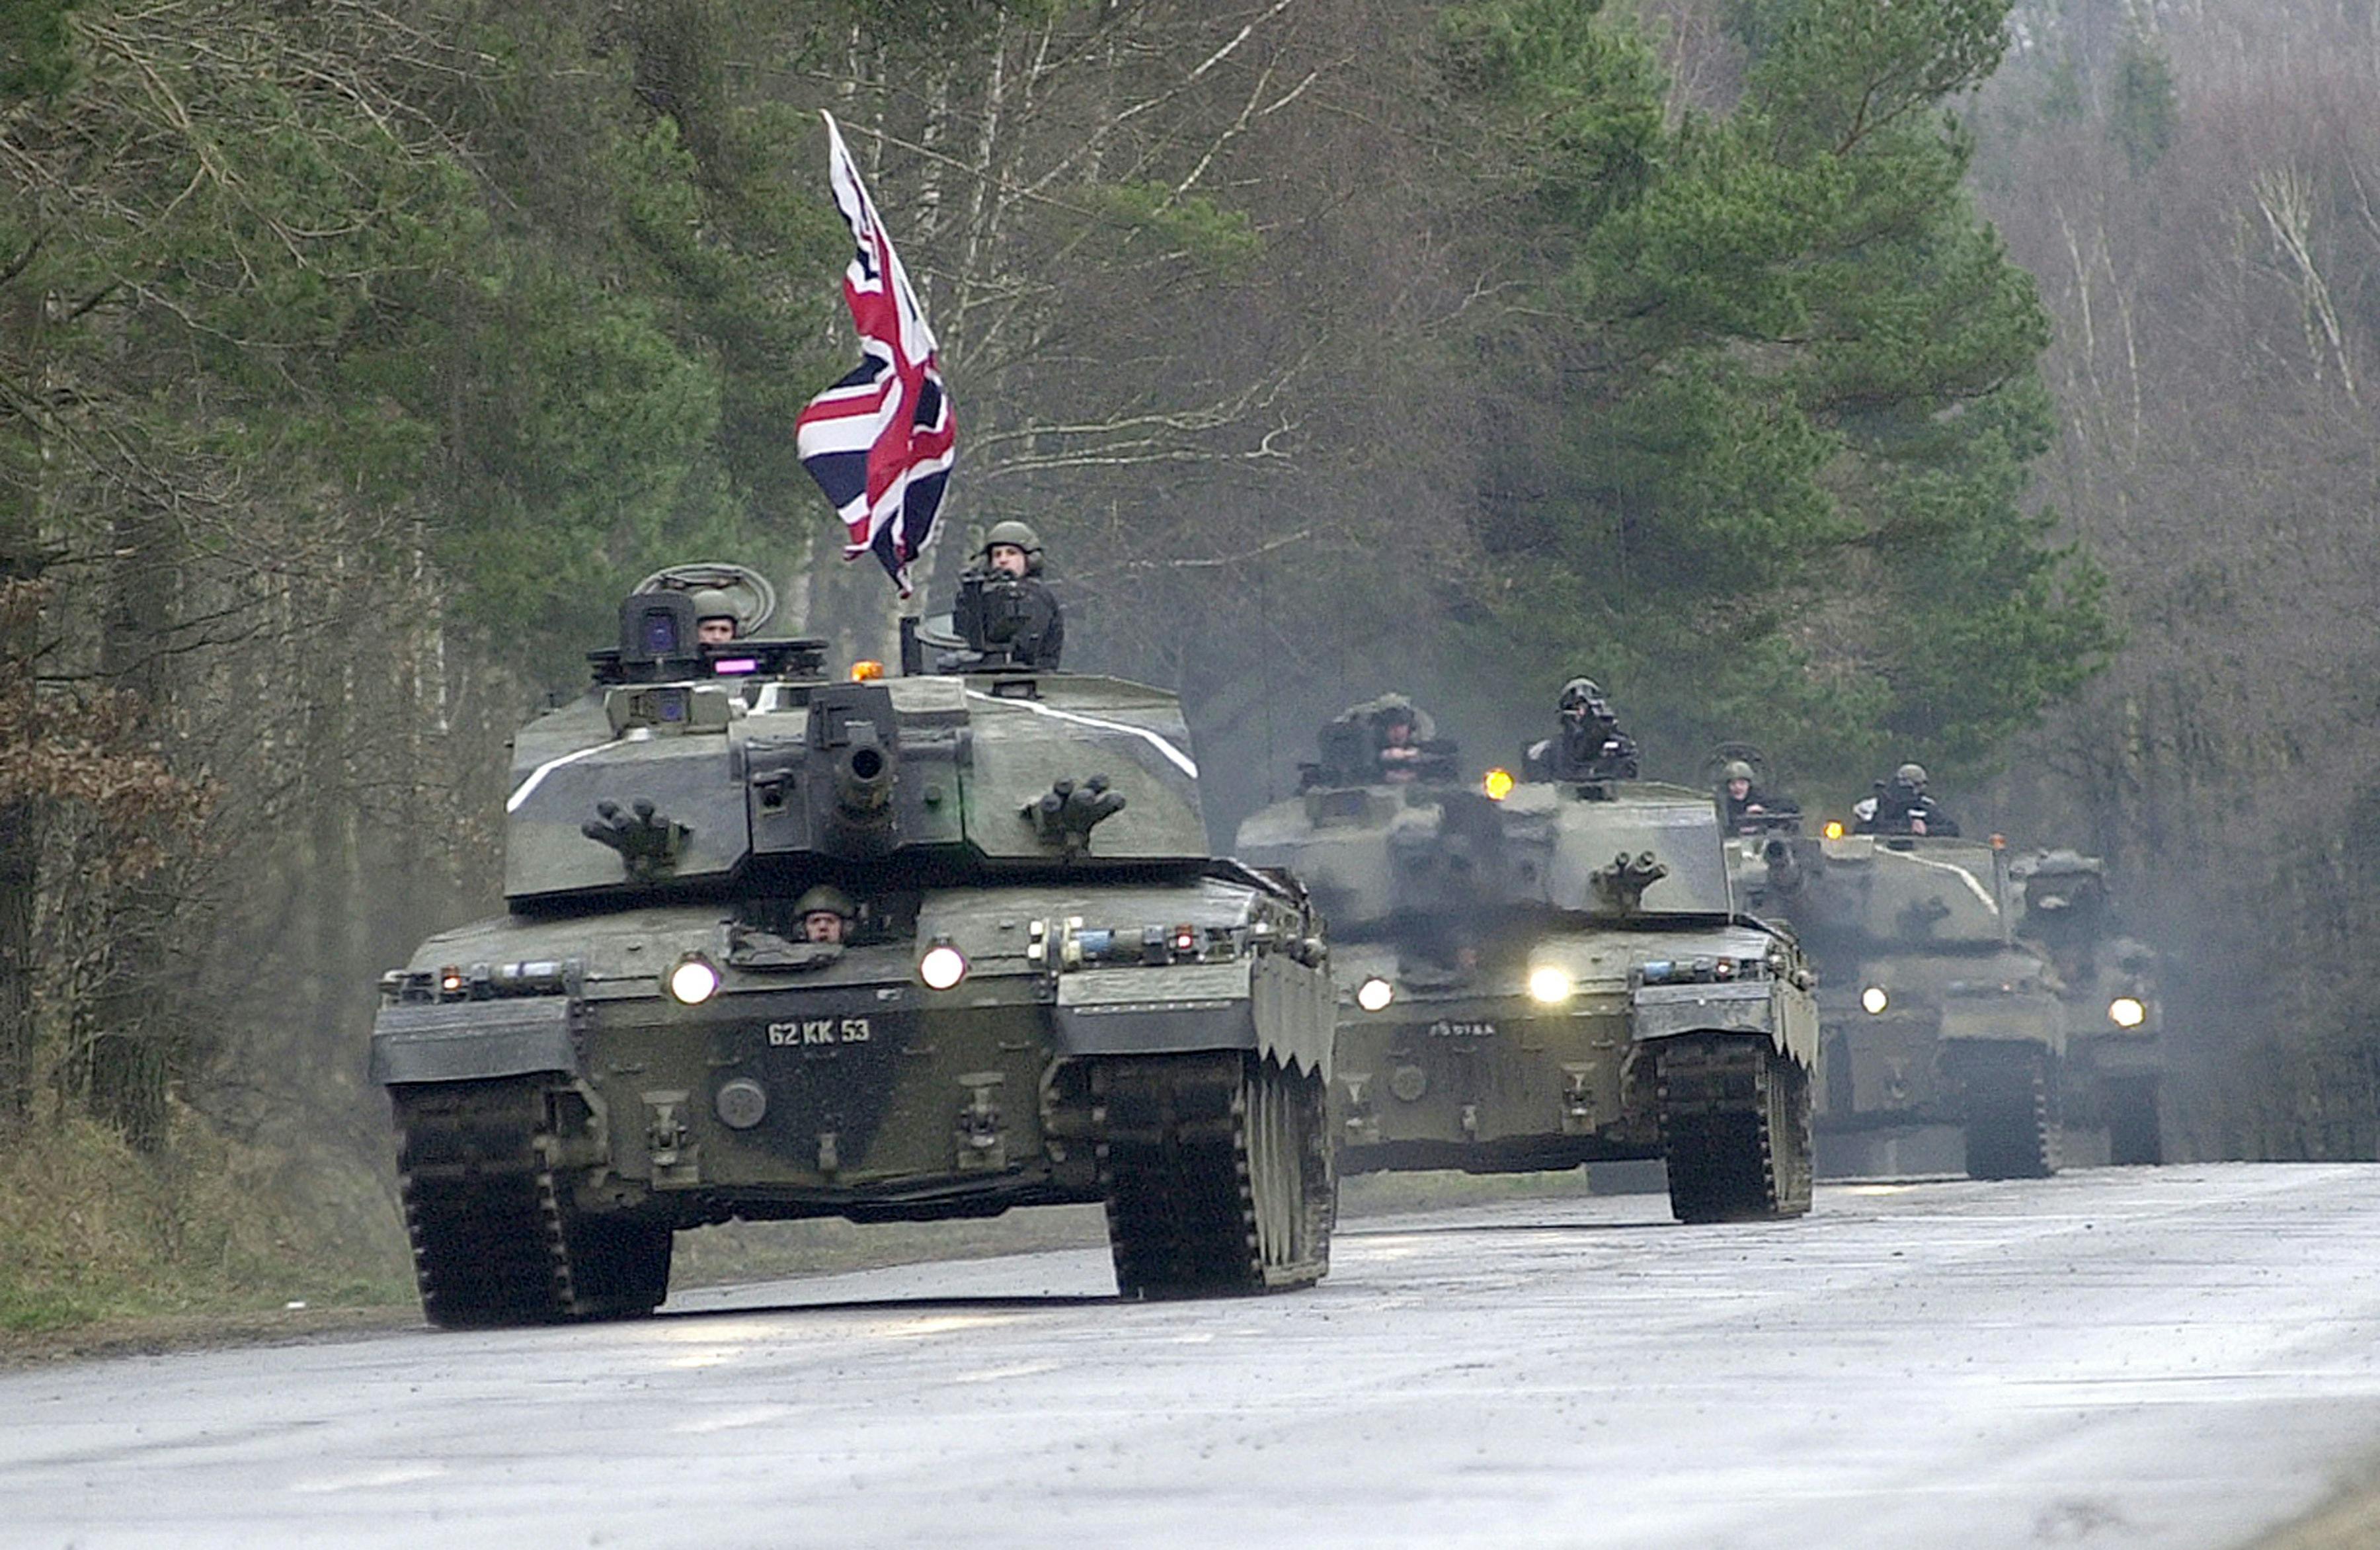 Squadron of British tanks arrive in Poland to deter Russia